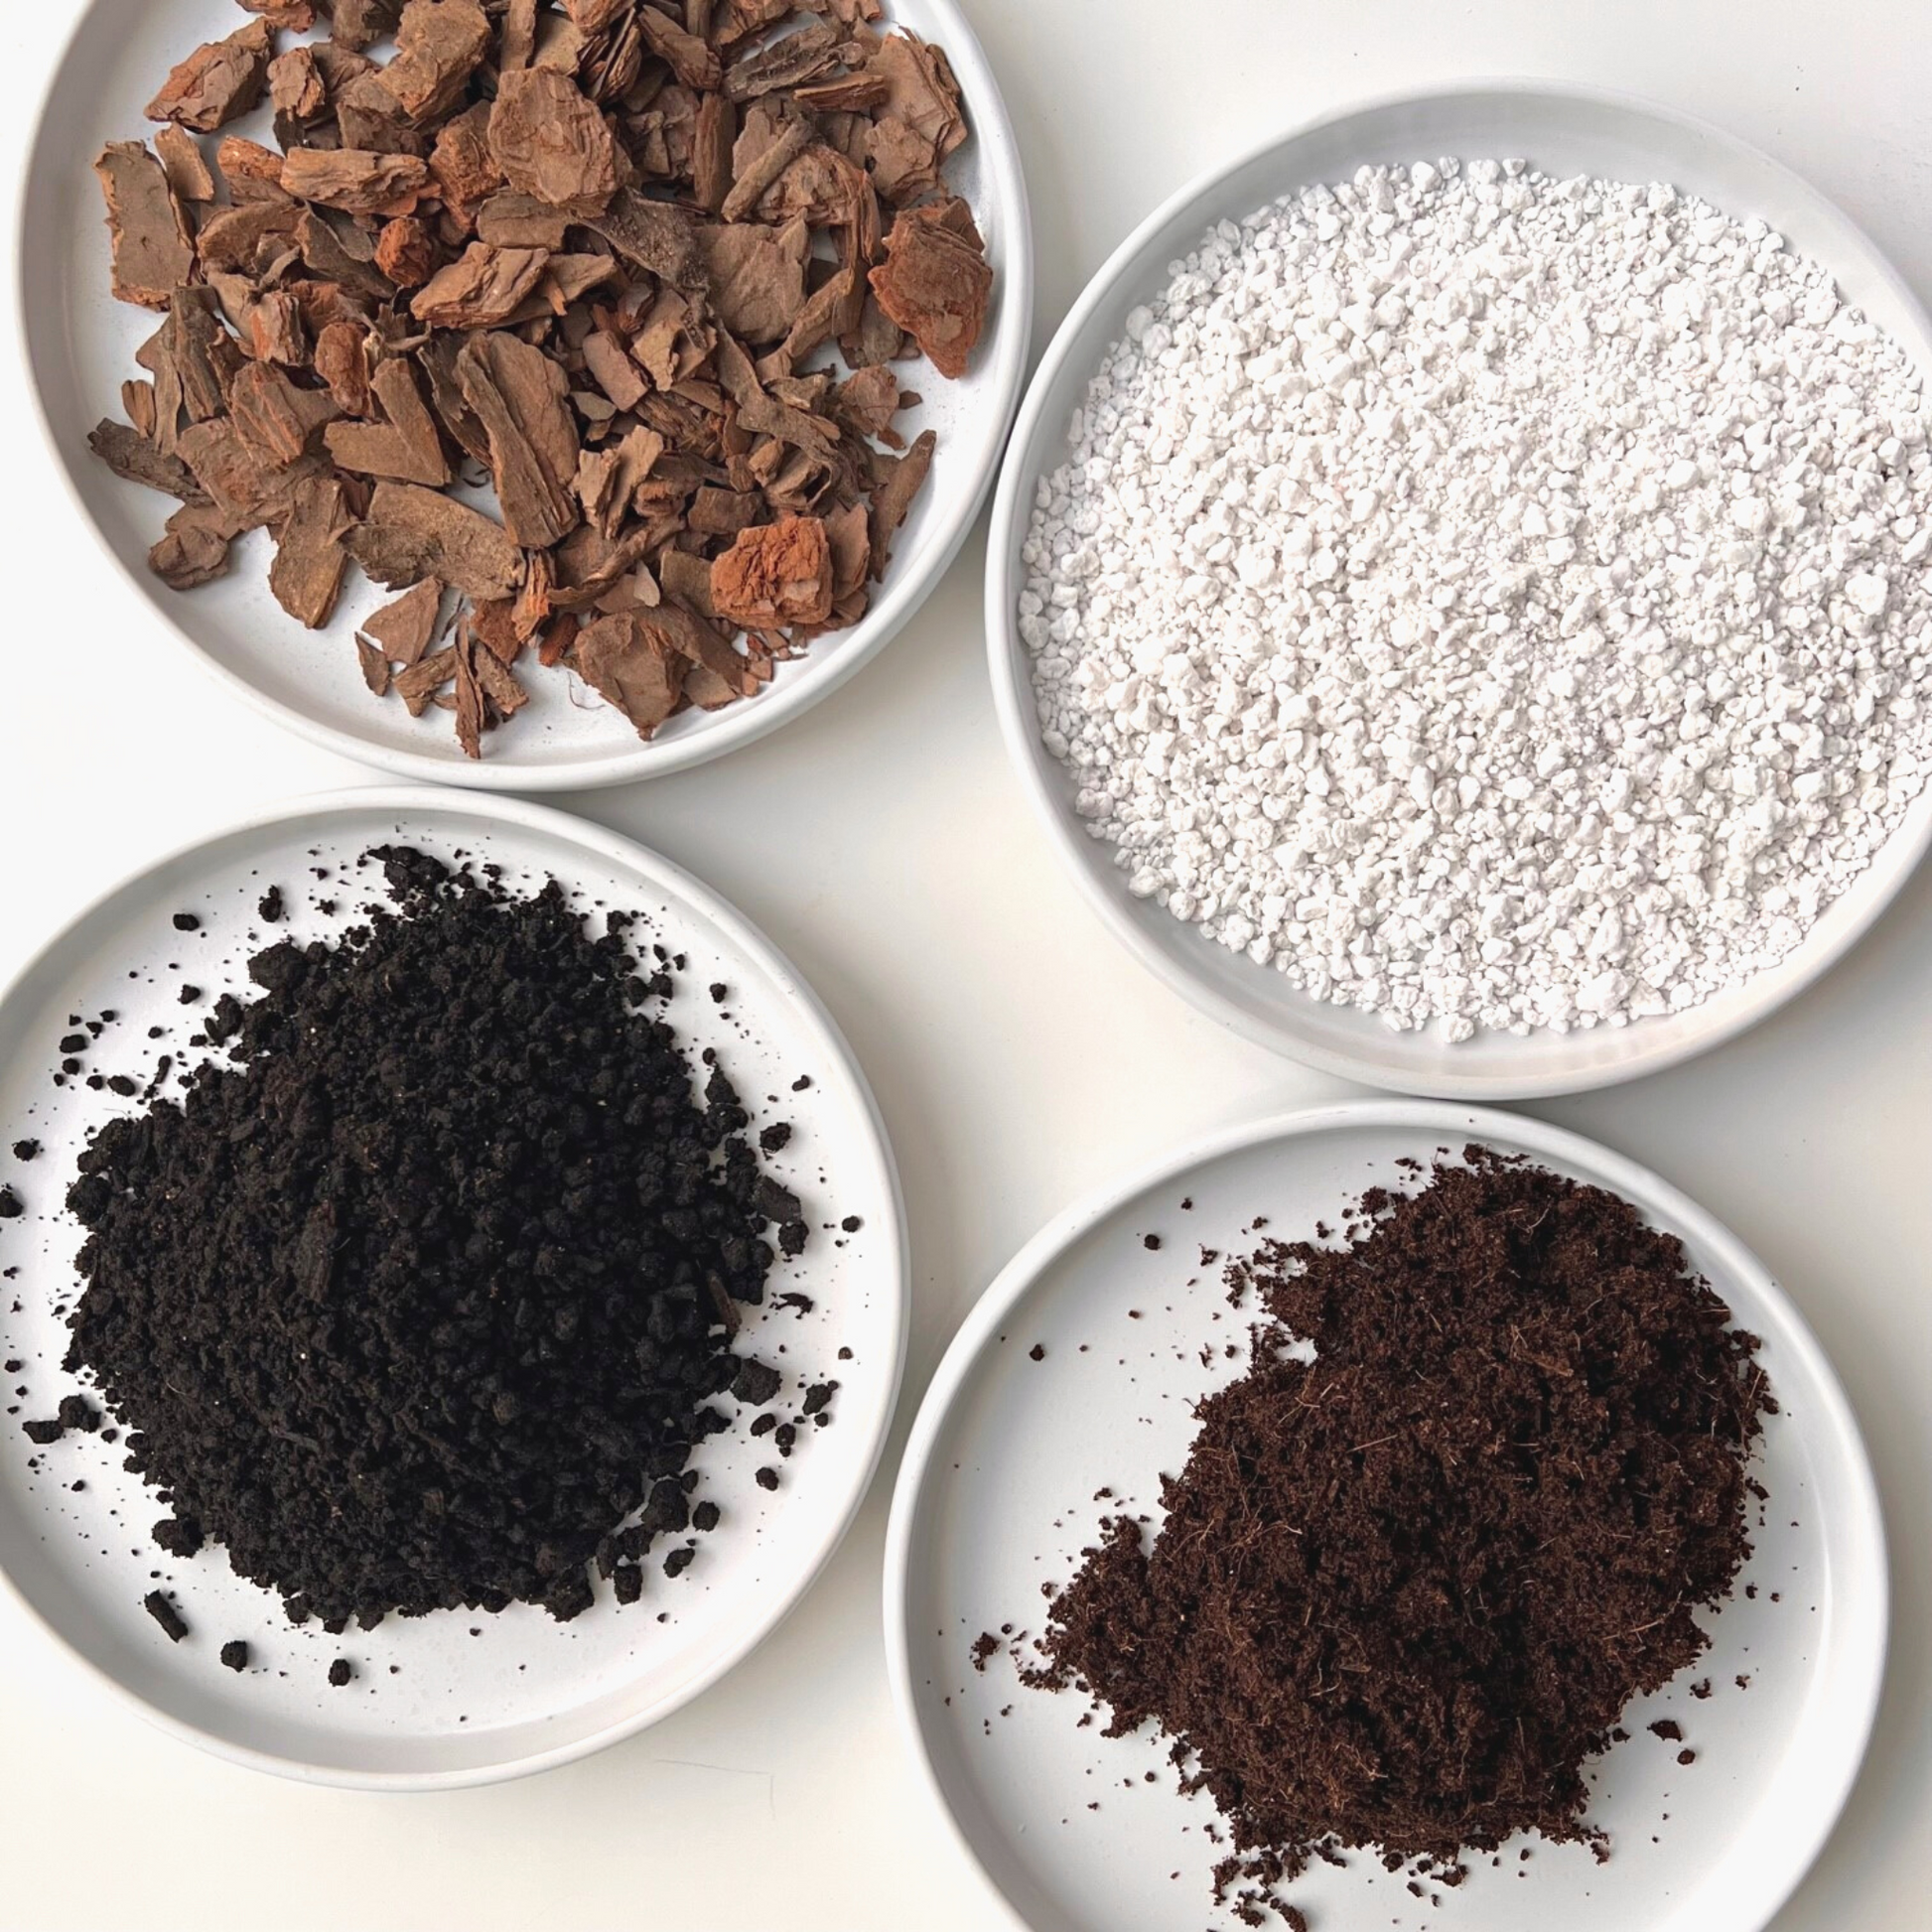 A ingredient makeup of Birdy's Plants Premium Hoya Soil Mix including orchid bark, coarse perlite, worm castings, and coco coir.